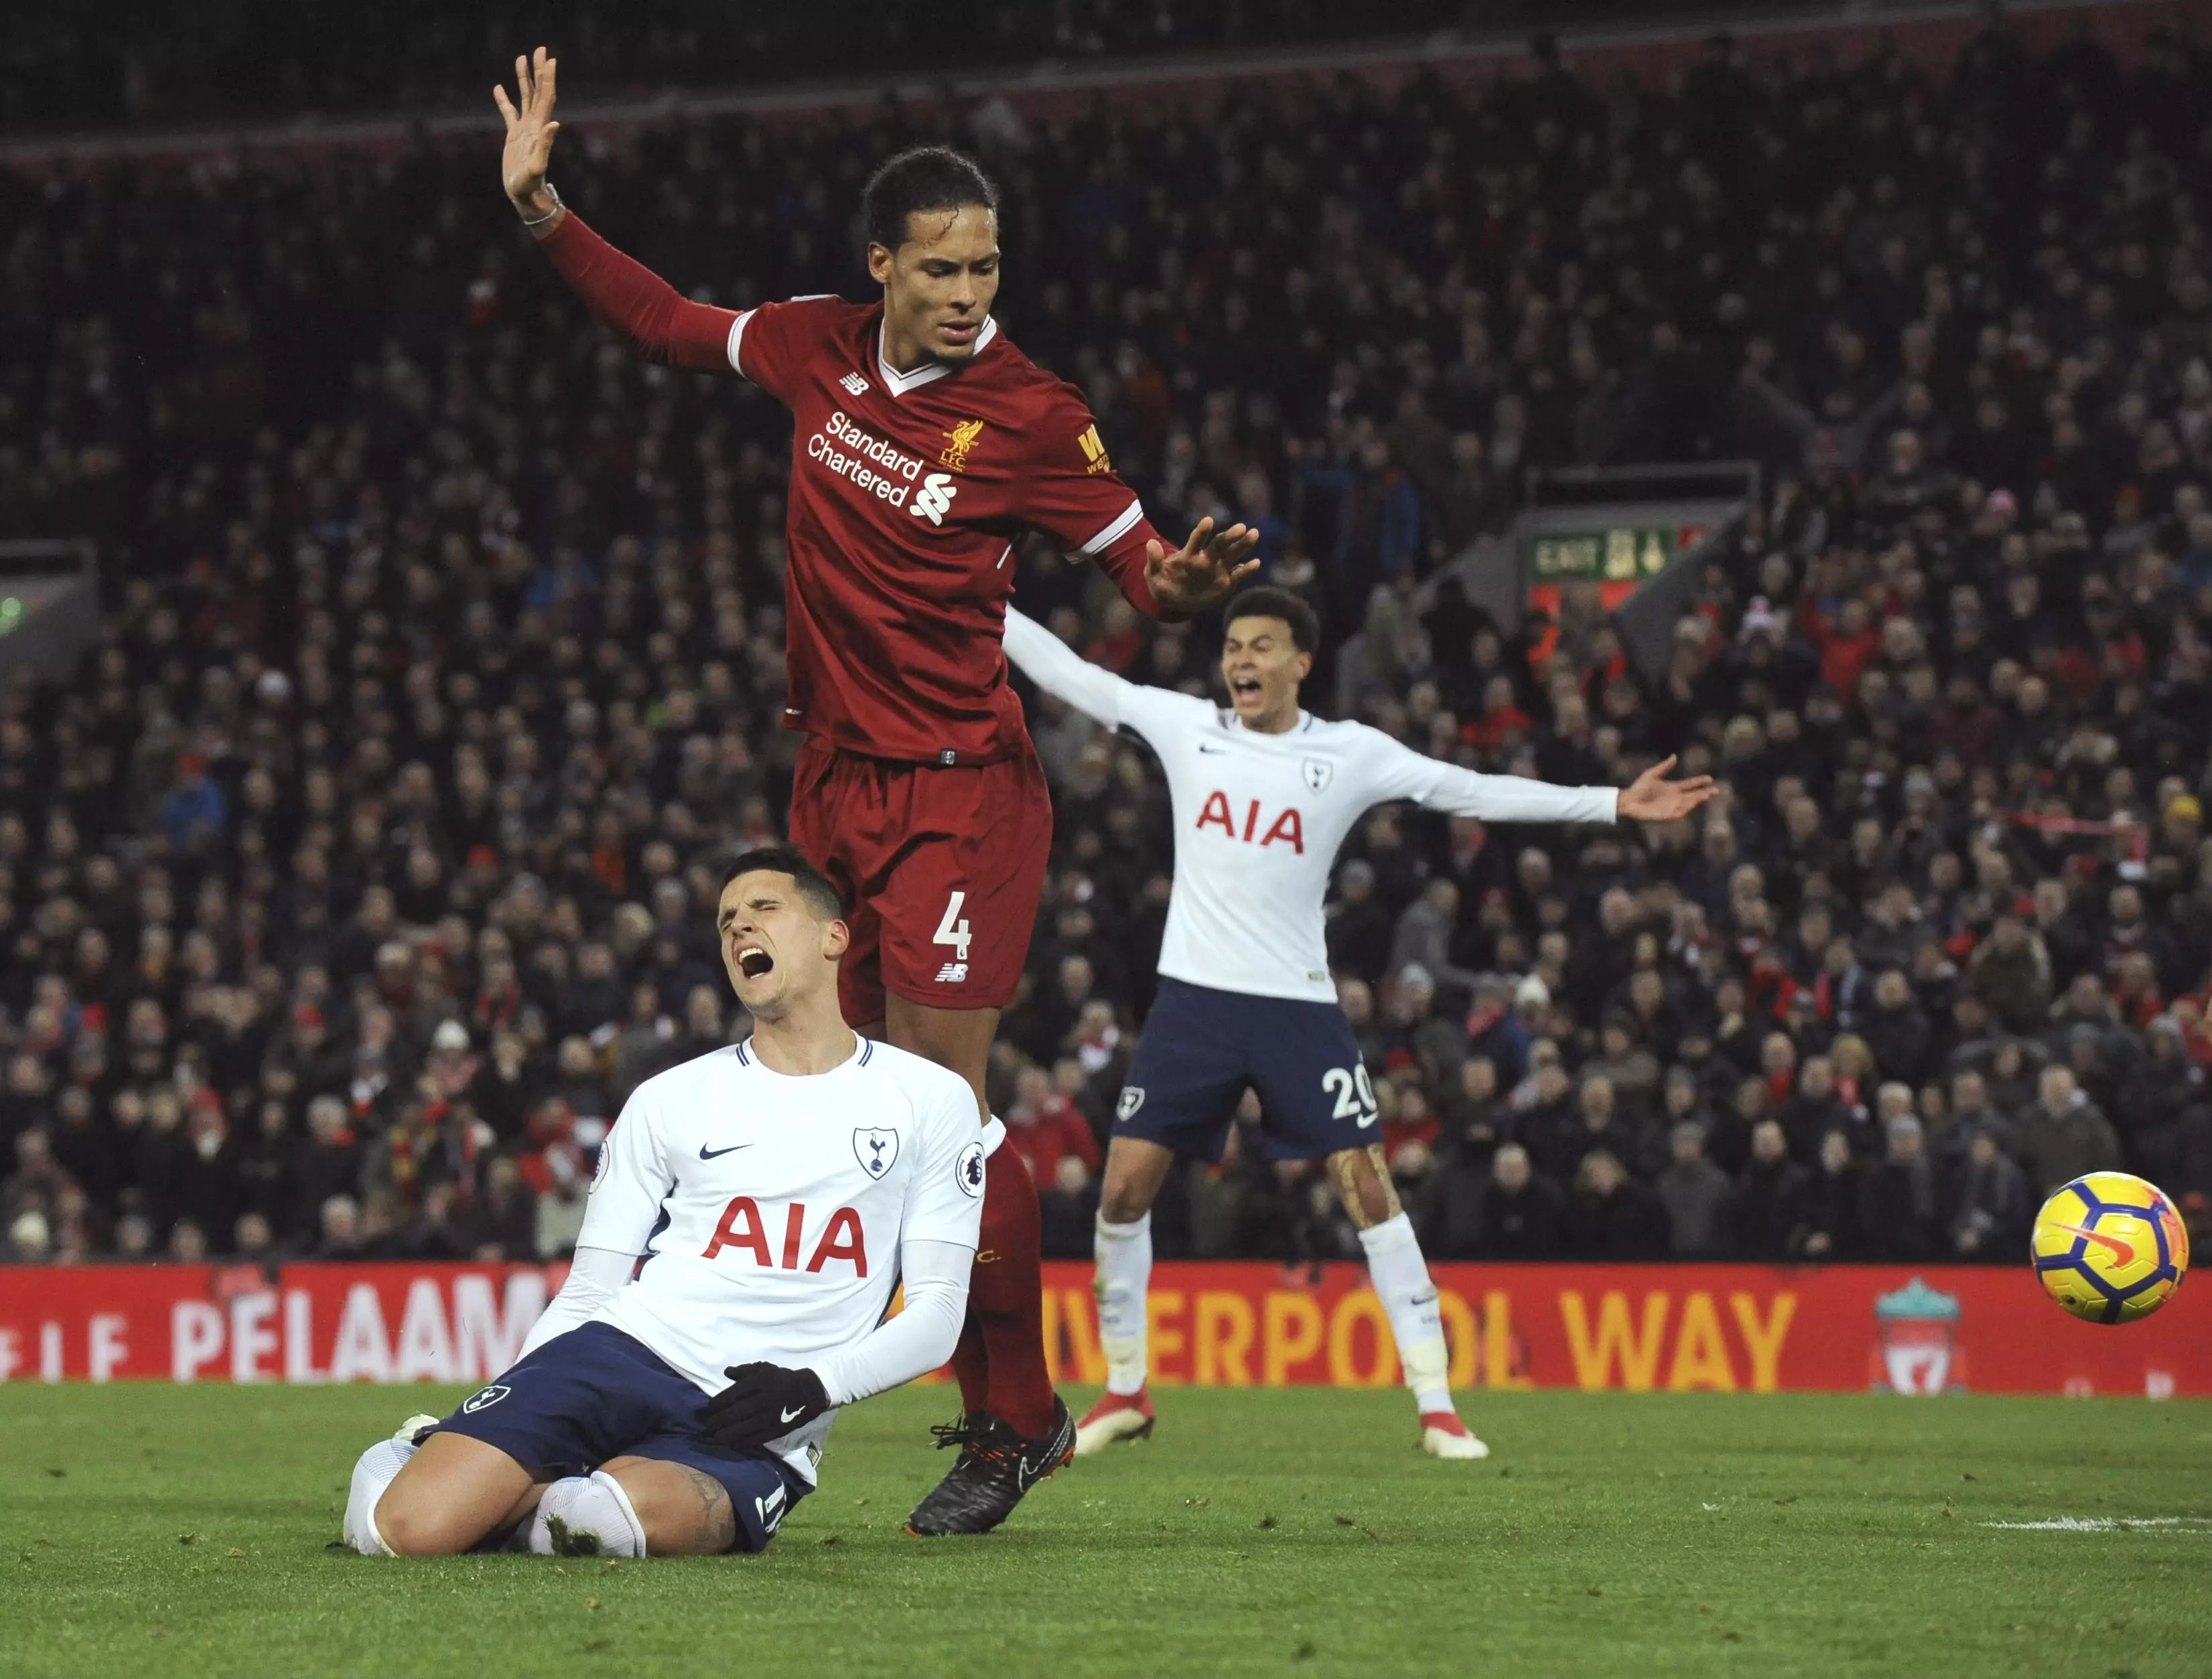 Liverpool fans believed Lamela had dived. Image: PA Images.